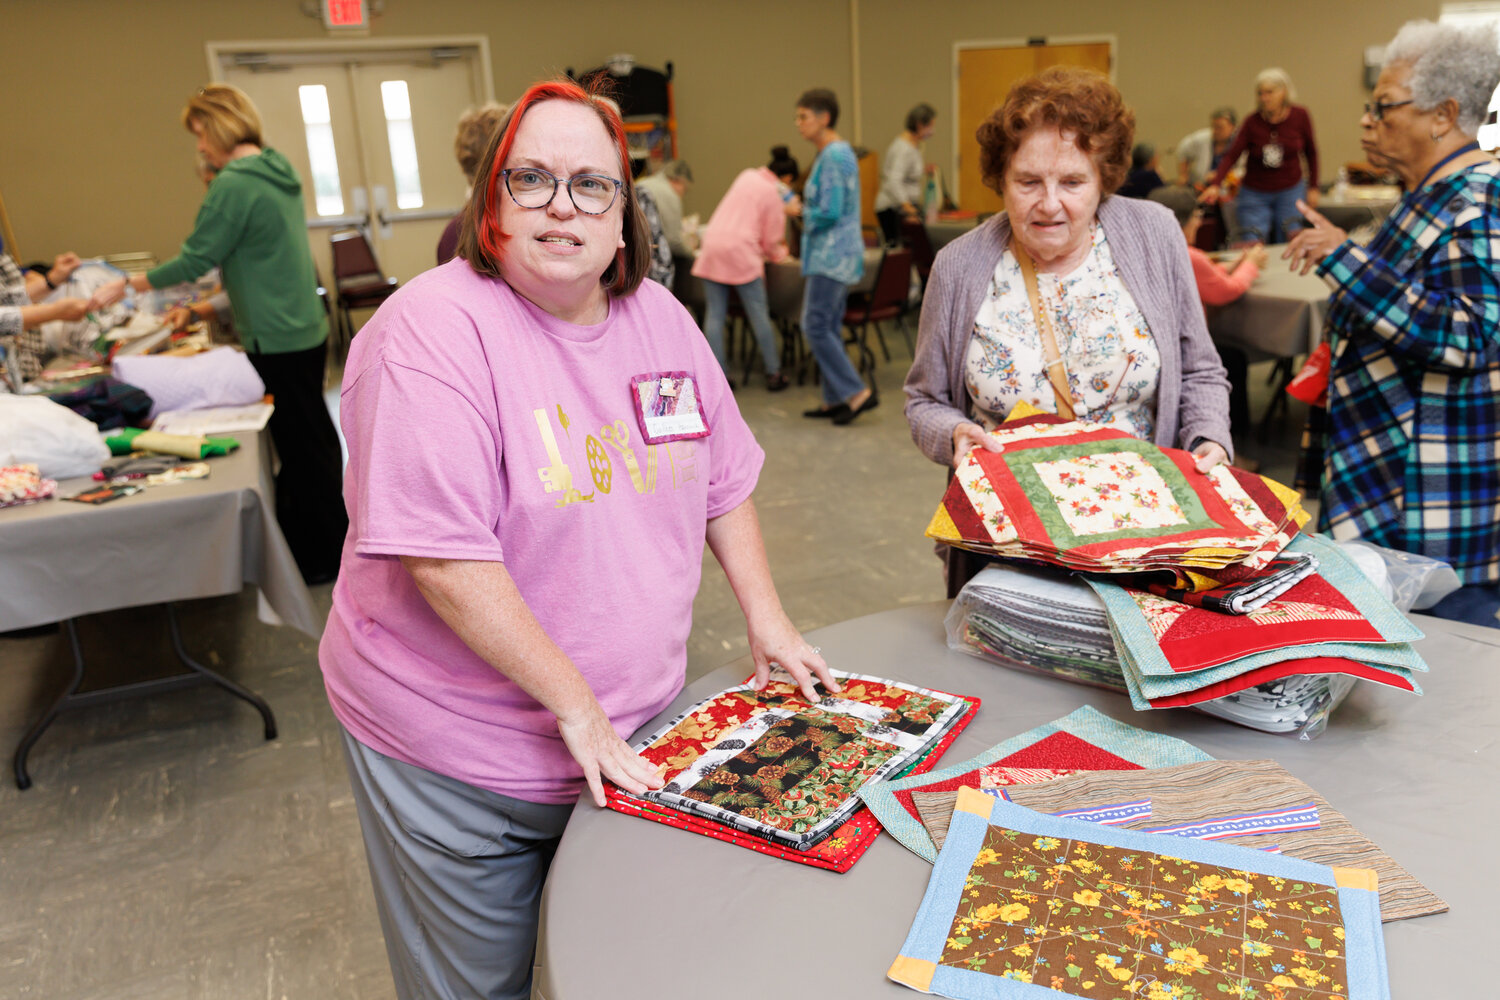 Colleen Heacock uses her quilting skills to make placemats supporting Meals on Wheels over the holidays. Photo: Tony Wooten